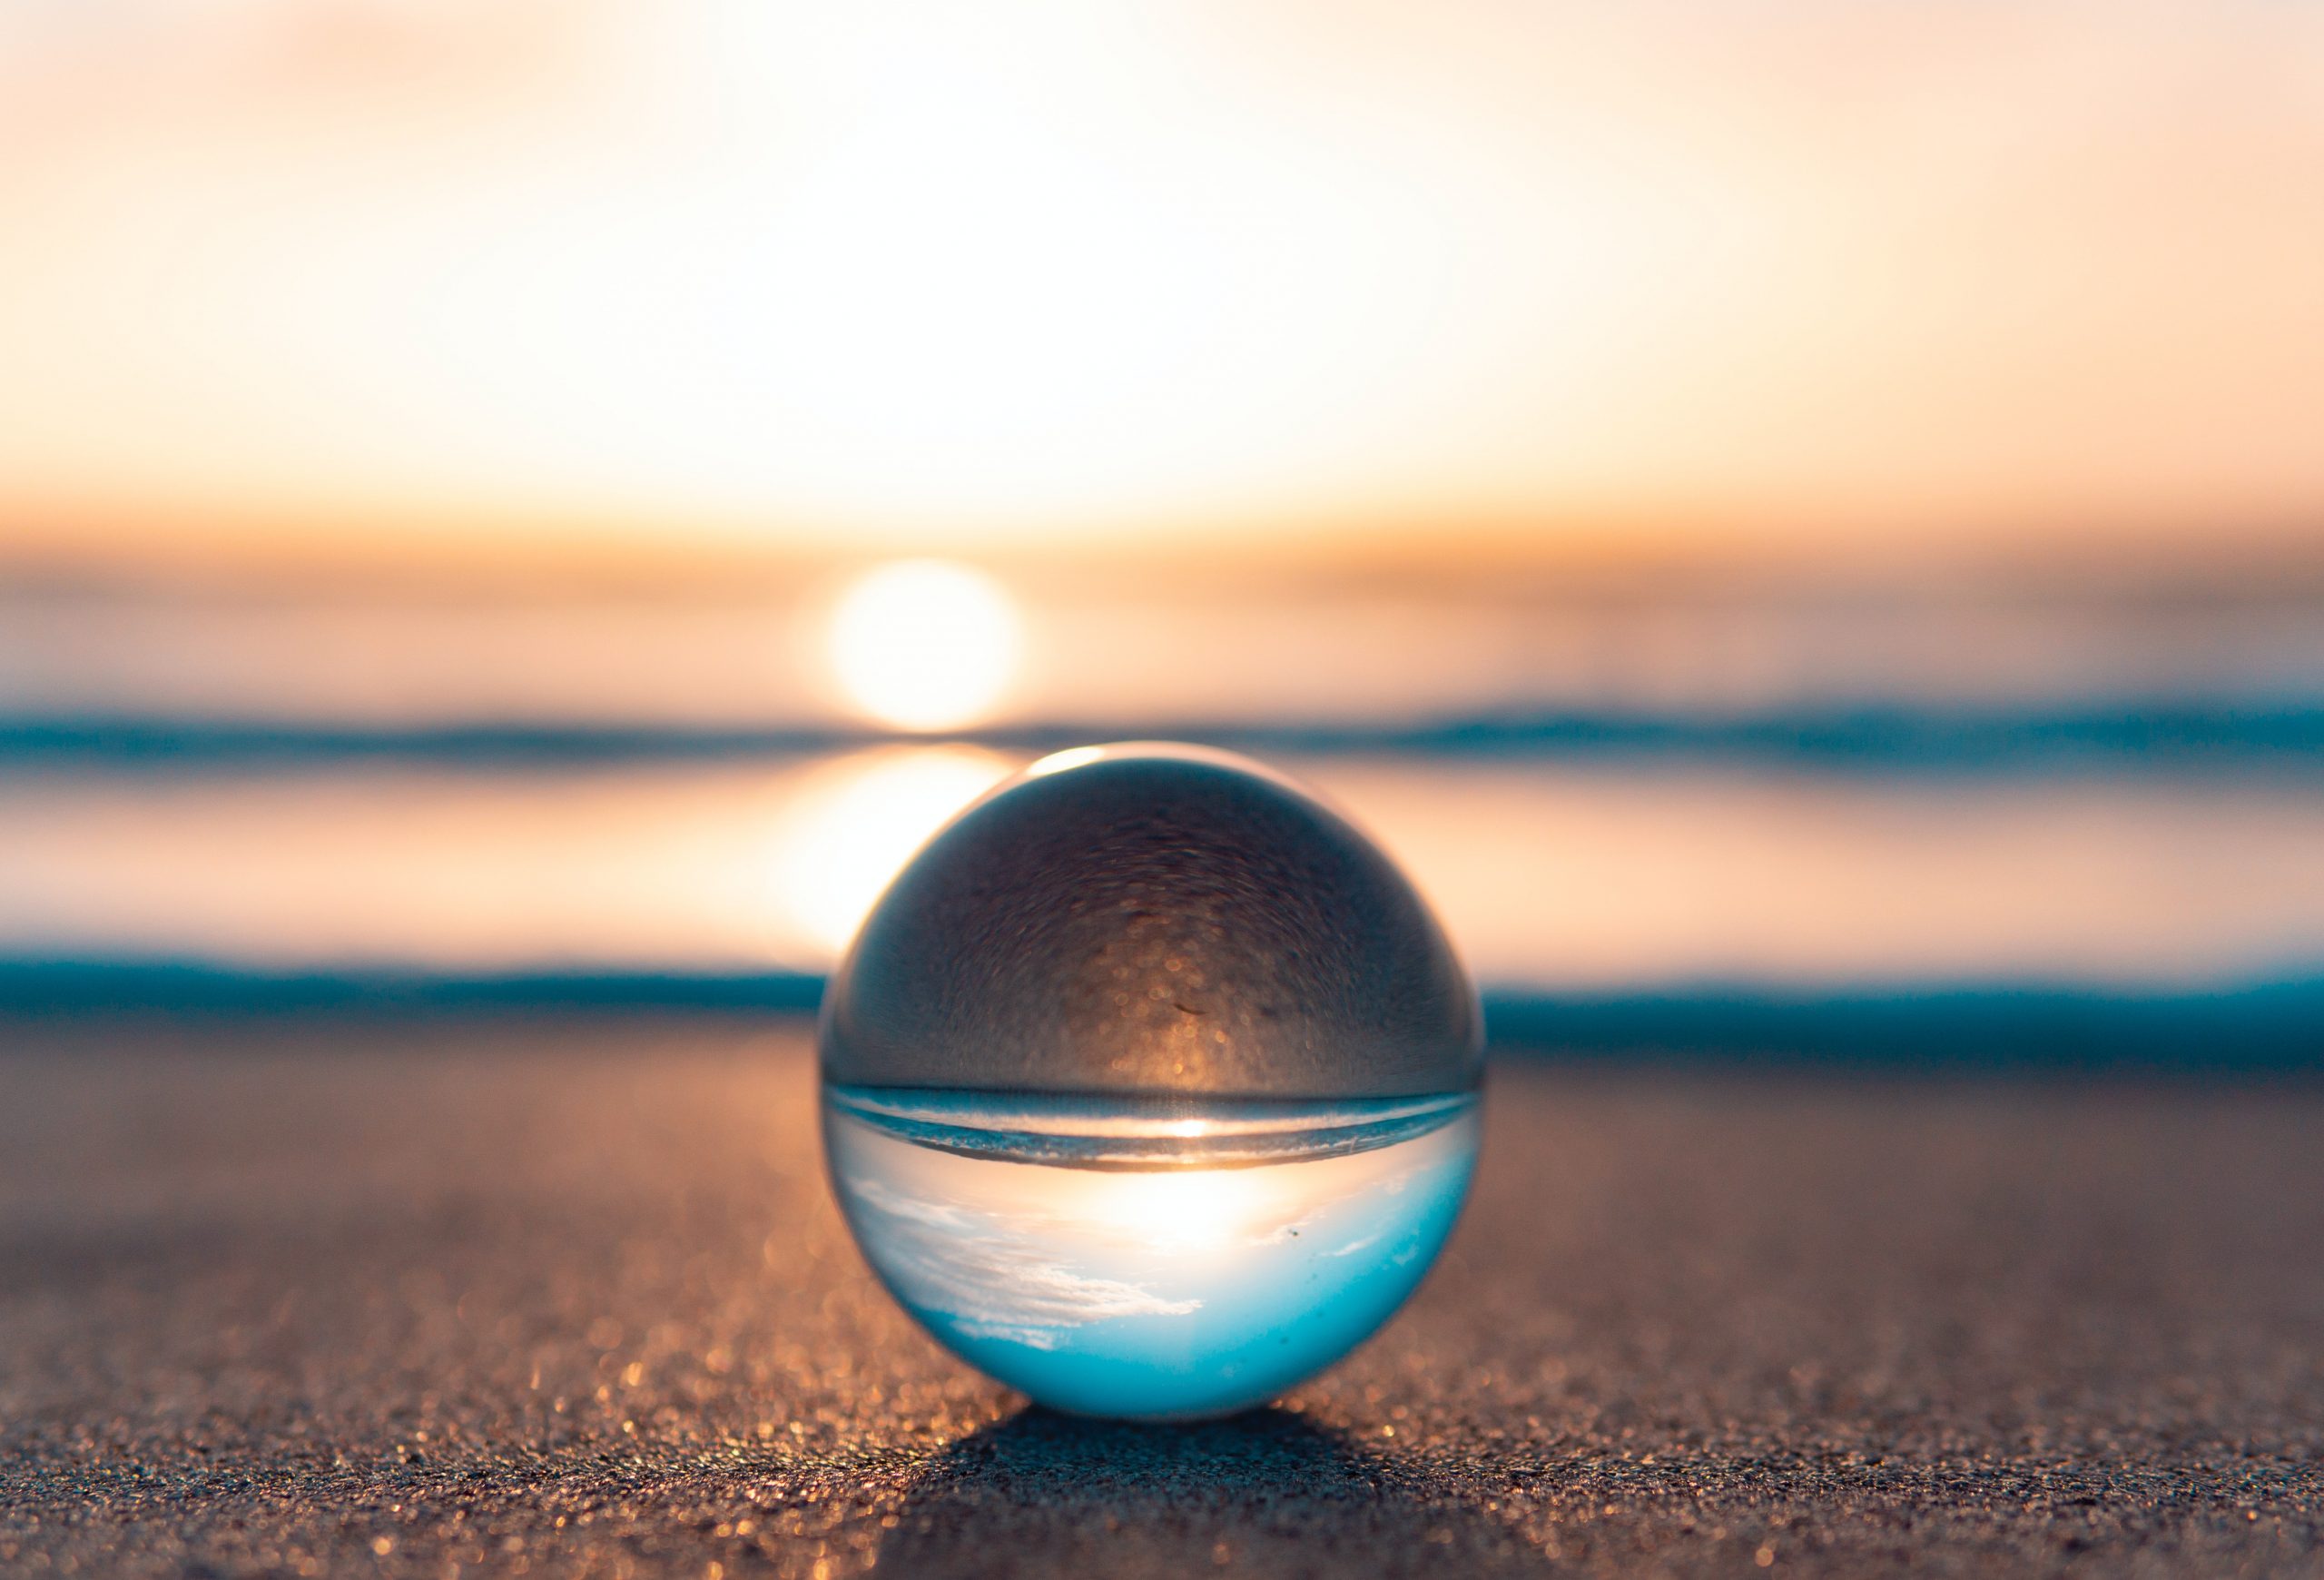 A clear glass ball resting on a beach, the sunset reflecting through it.